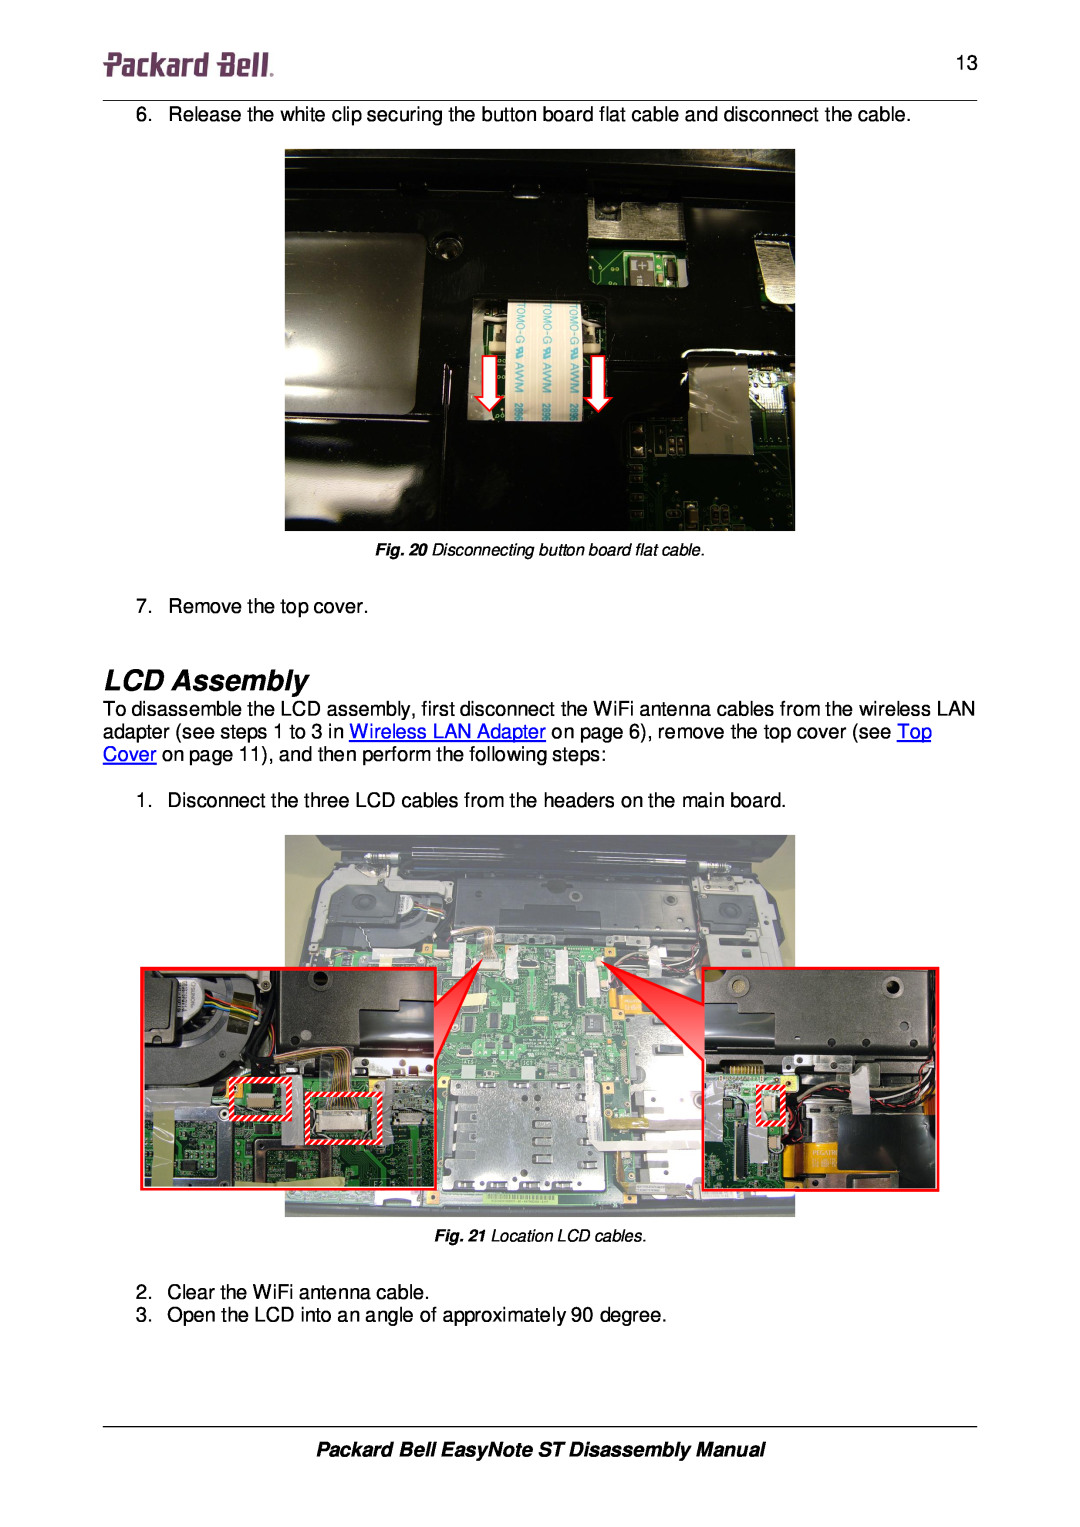 Packard Bell manual LCD Assembly, Packard Bell EasyNote ST Disassembly Manual 